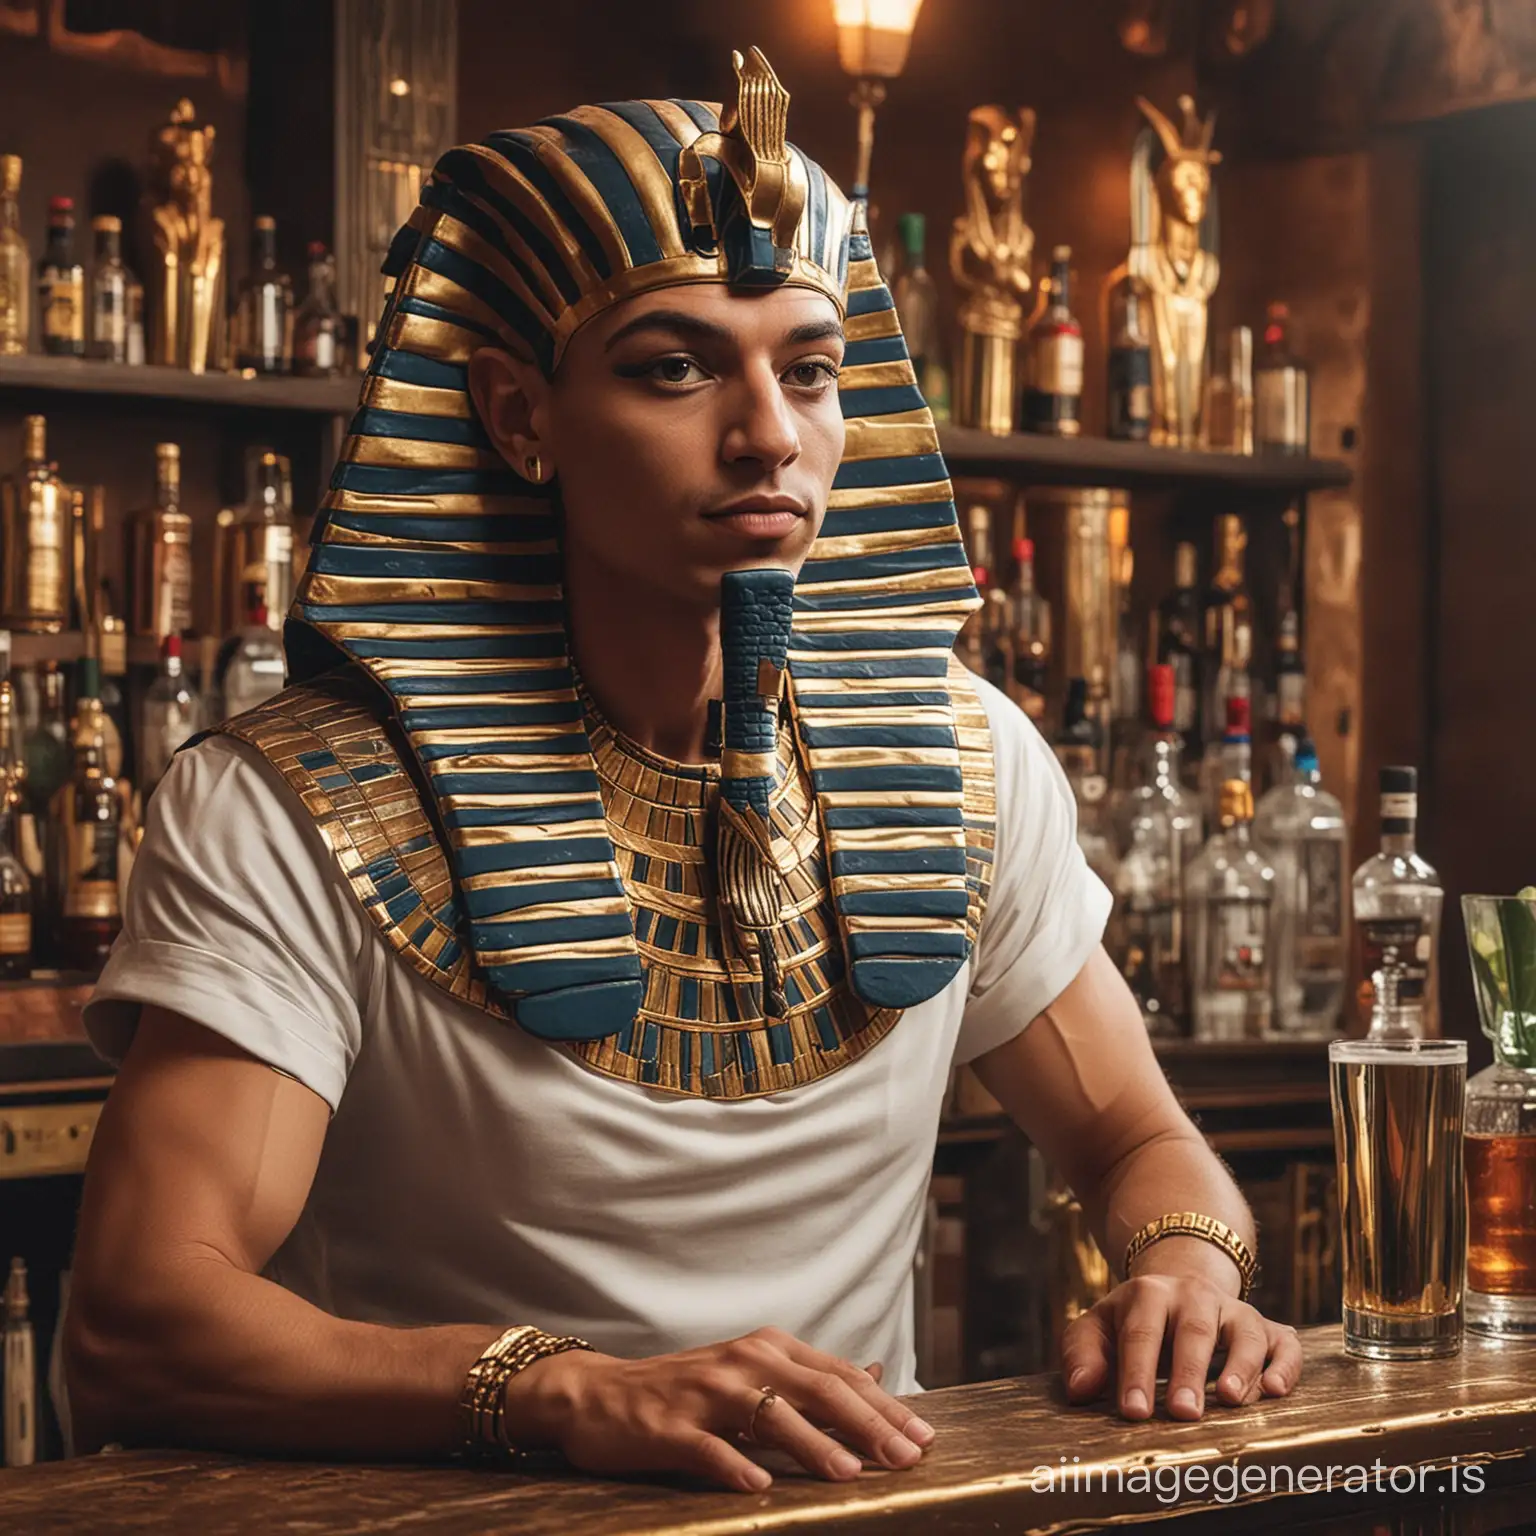 Ancient-Egyptian-Themed-Bartenders-Serving-Refreshments